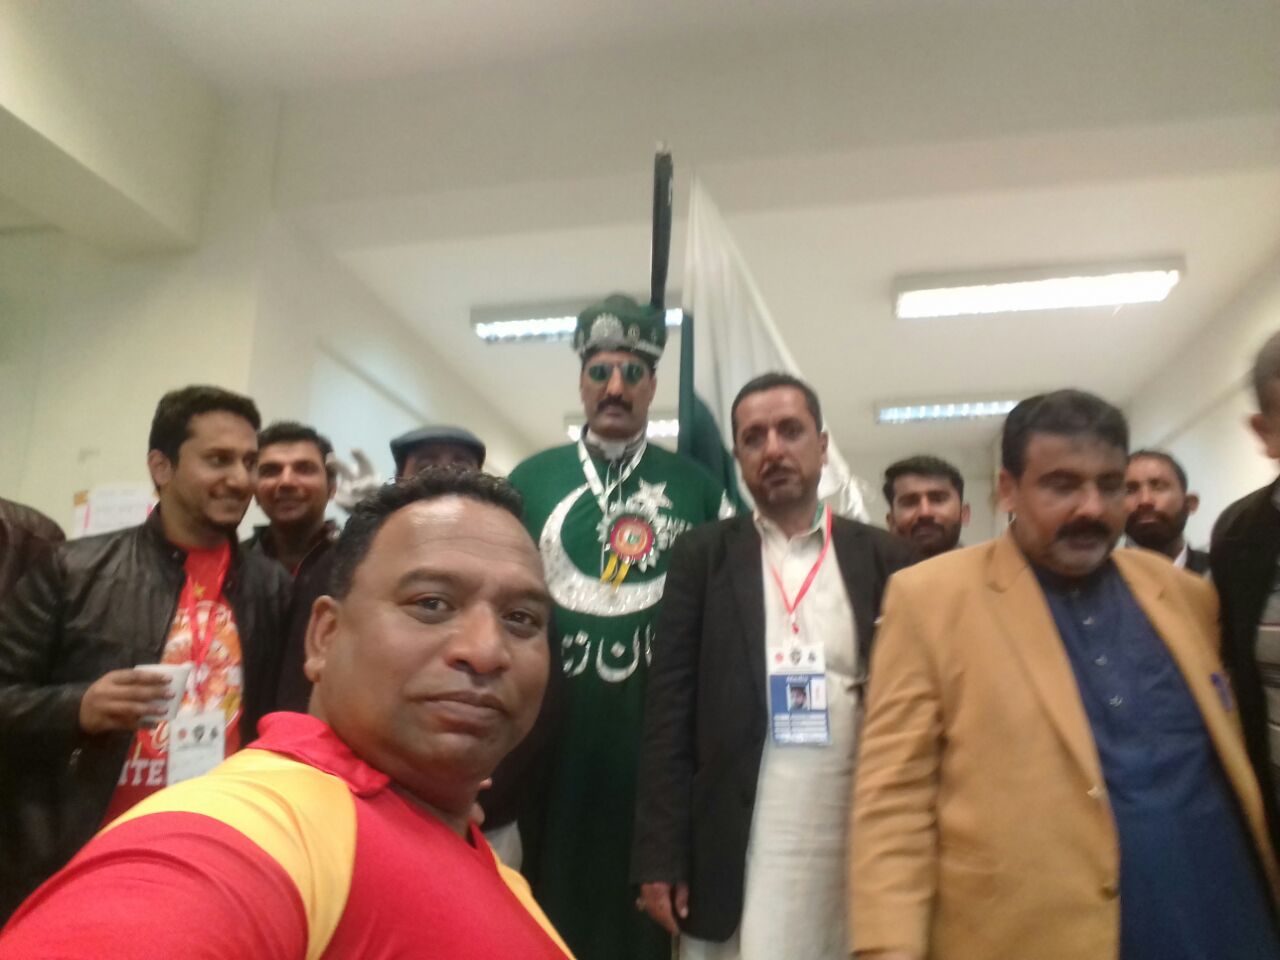 SHOW, OFF, MATCH, OF, PSL, AT, RAWALPINDI, CRICKET, STADIUM, BETWEEN, ISLAMABAD UNITED, AND, QUETTA GLADIATORS, AFTER, CHACHA CRICKET, AND, CHACHA T20, NEW, CRICKET, FAN, BABU PAKISTANI, CAME, TO, SEE, FOR, THE, FIRST, TIME, DETAILED, INTERVIEW, BY, ASGHAR ALI MUBARAK, FOR, YESRUDU, NEWS